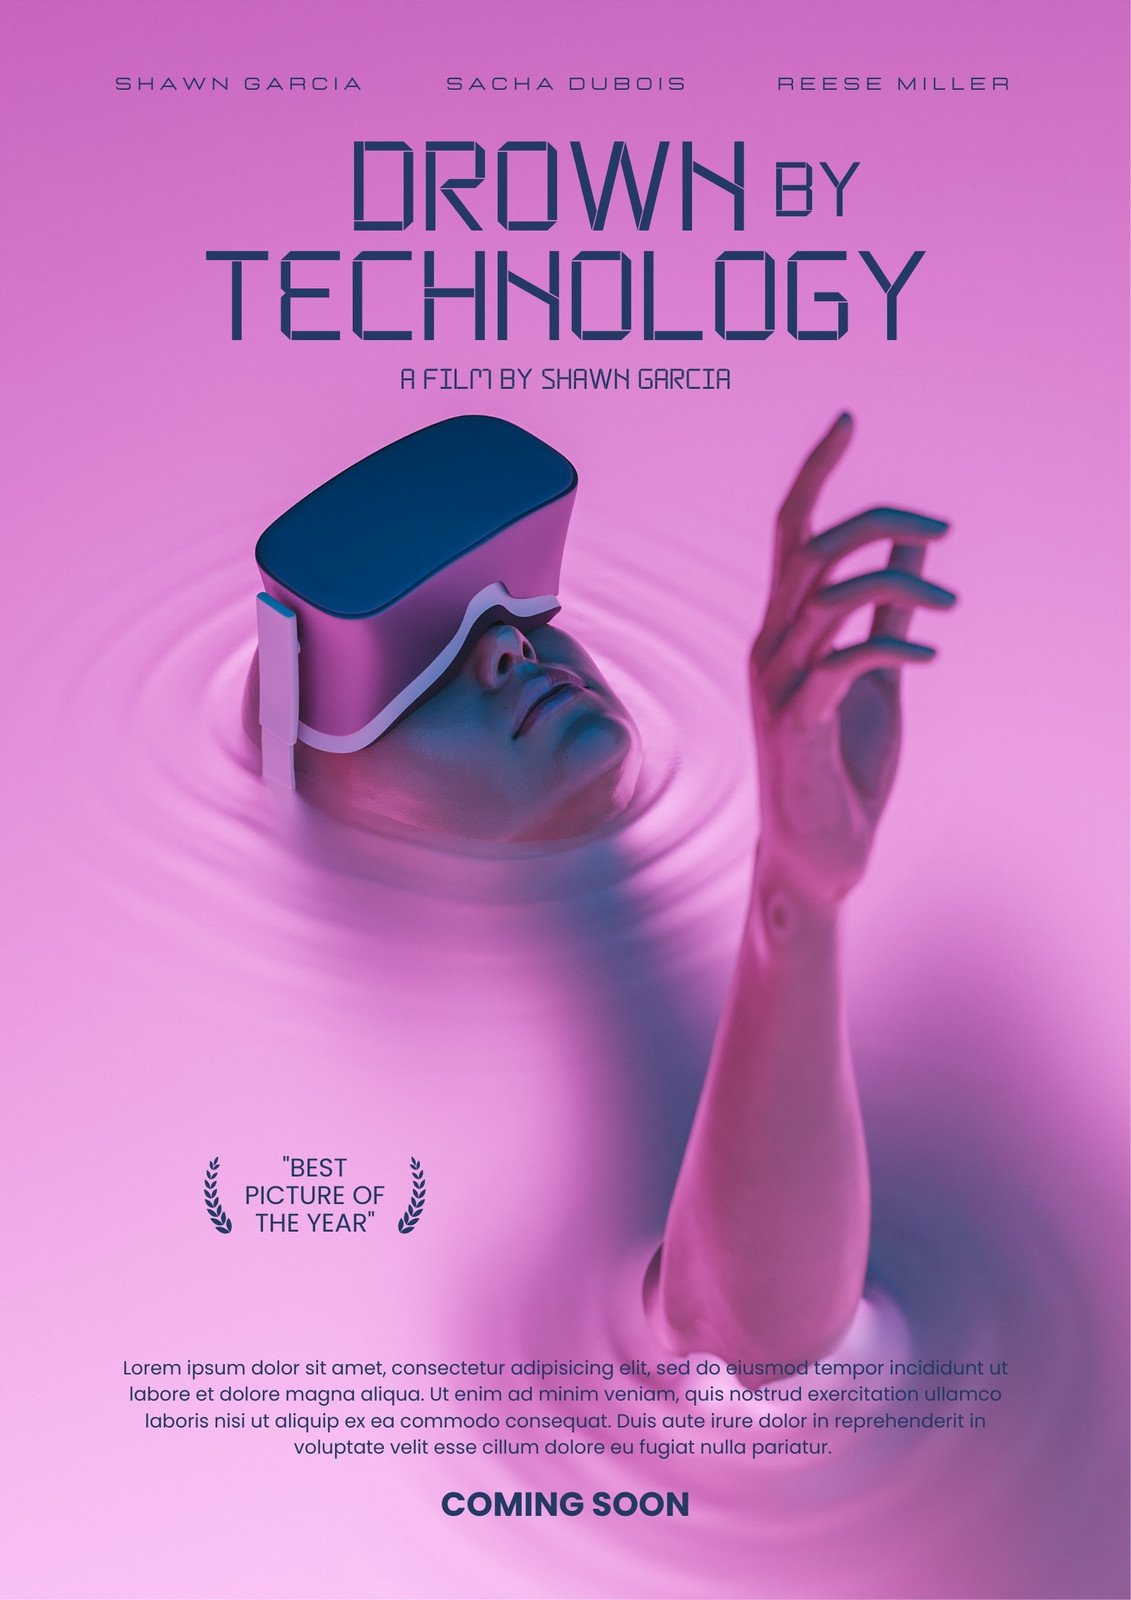 Purple artictic futuristic drown by technology movie poster